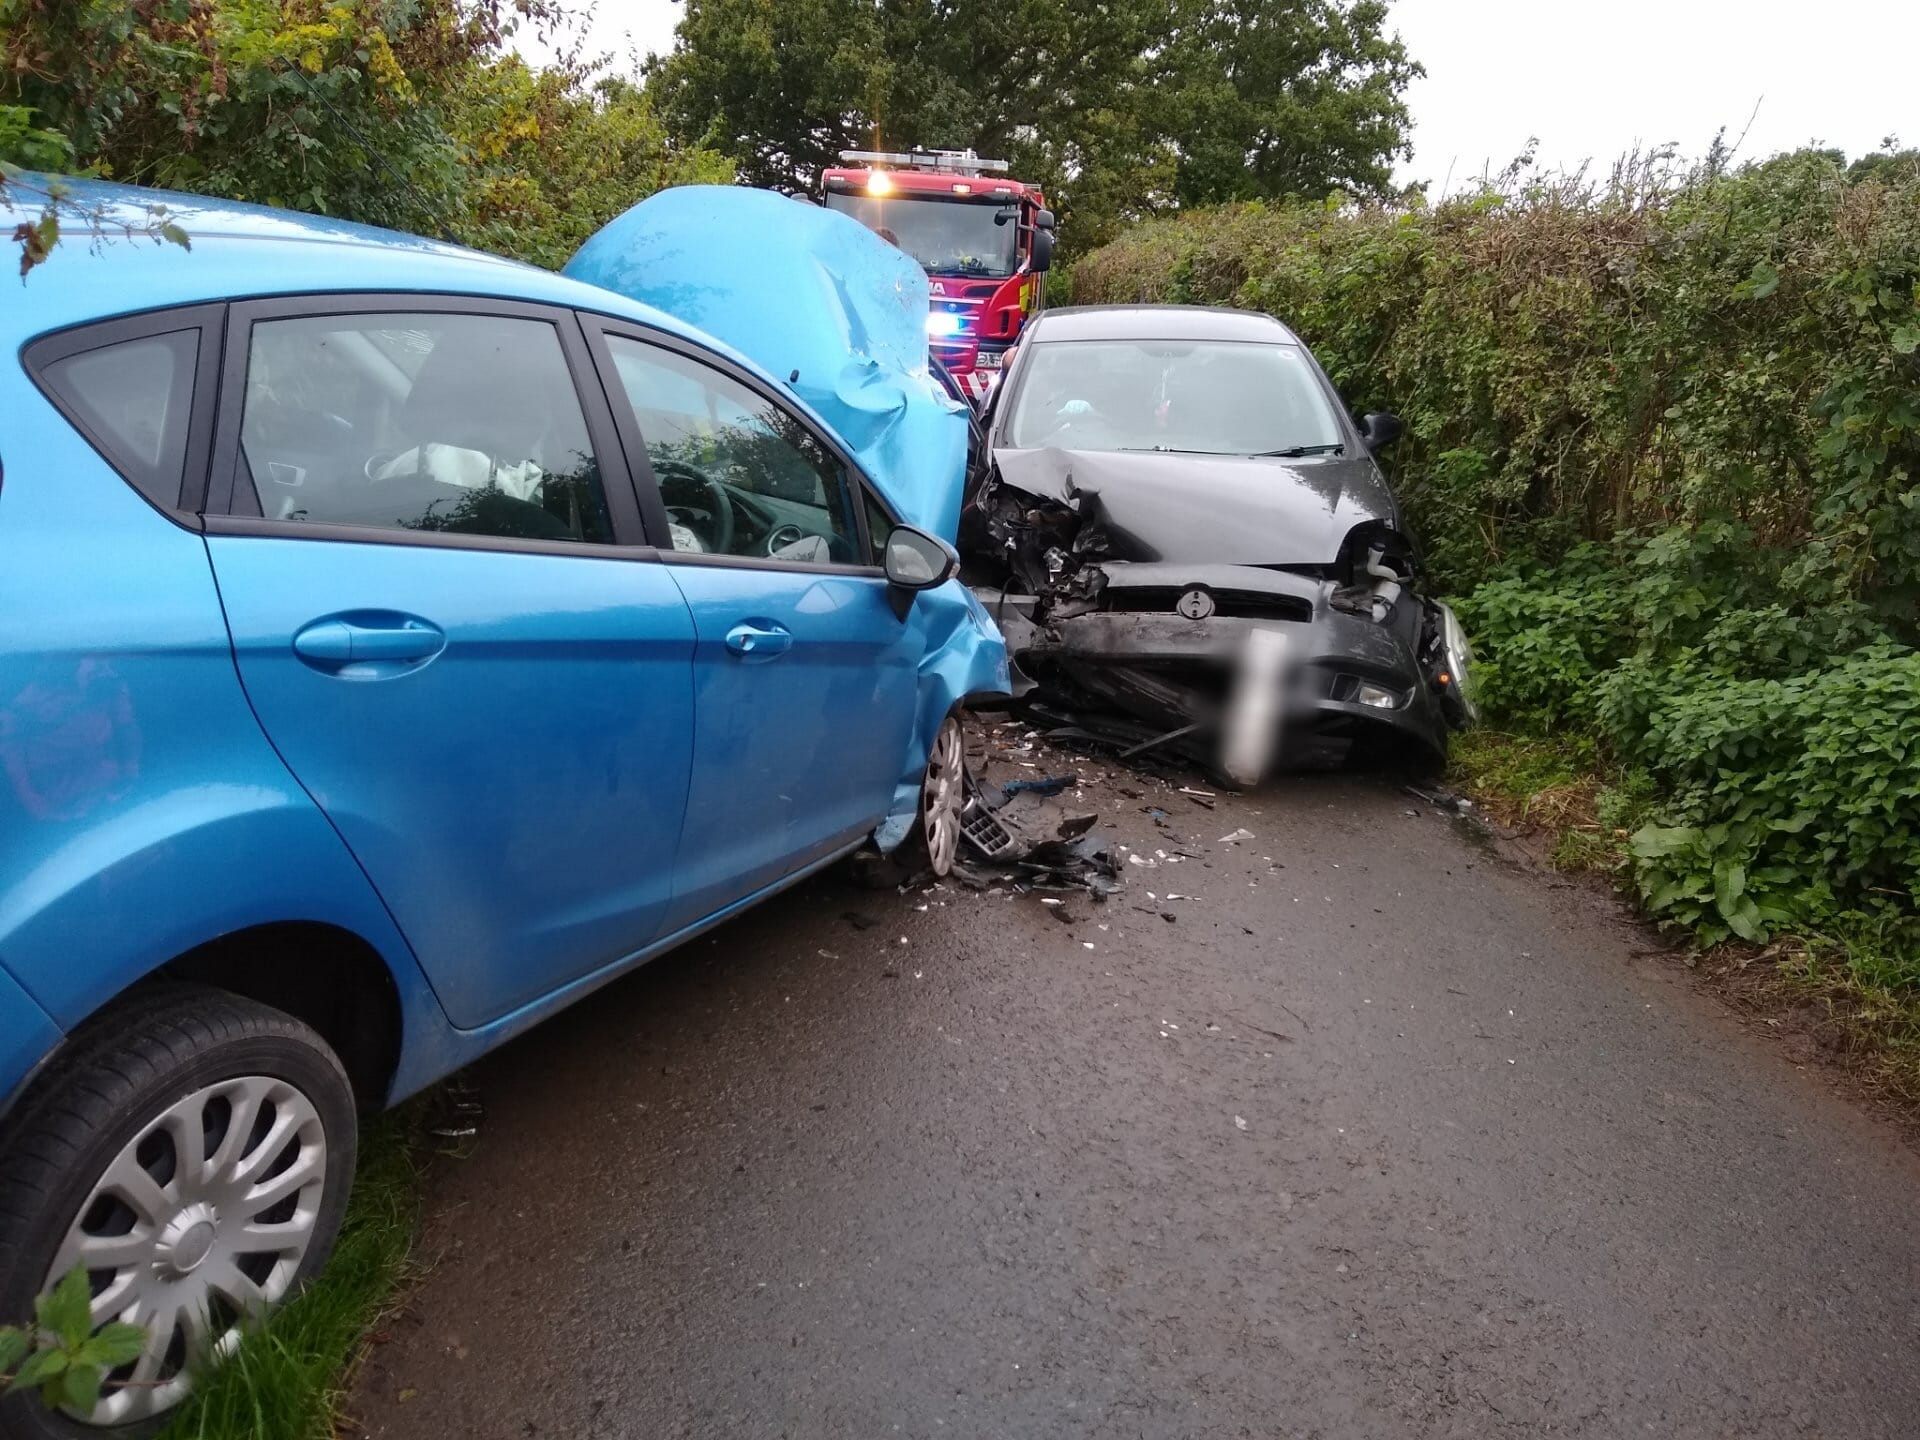 NEWS | Emergency services respond to RTC at Newton